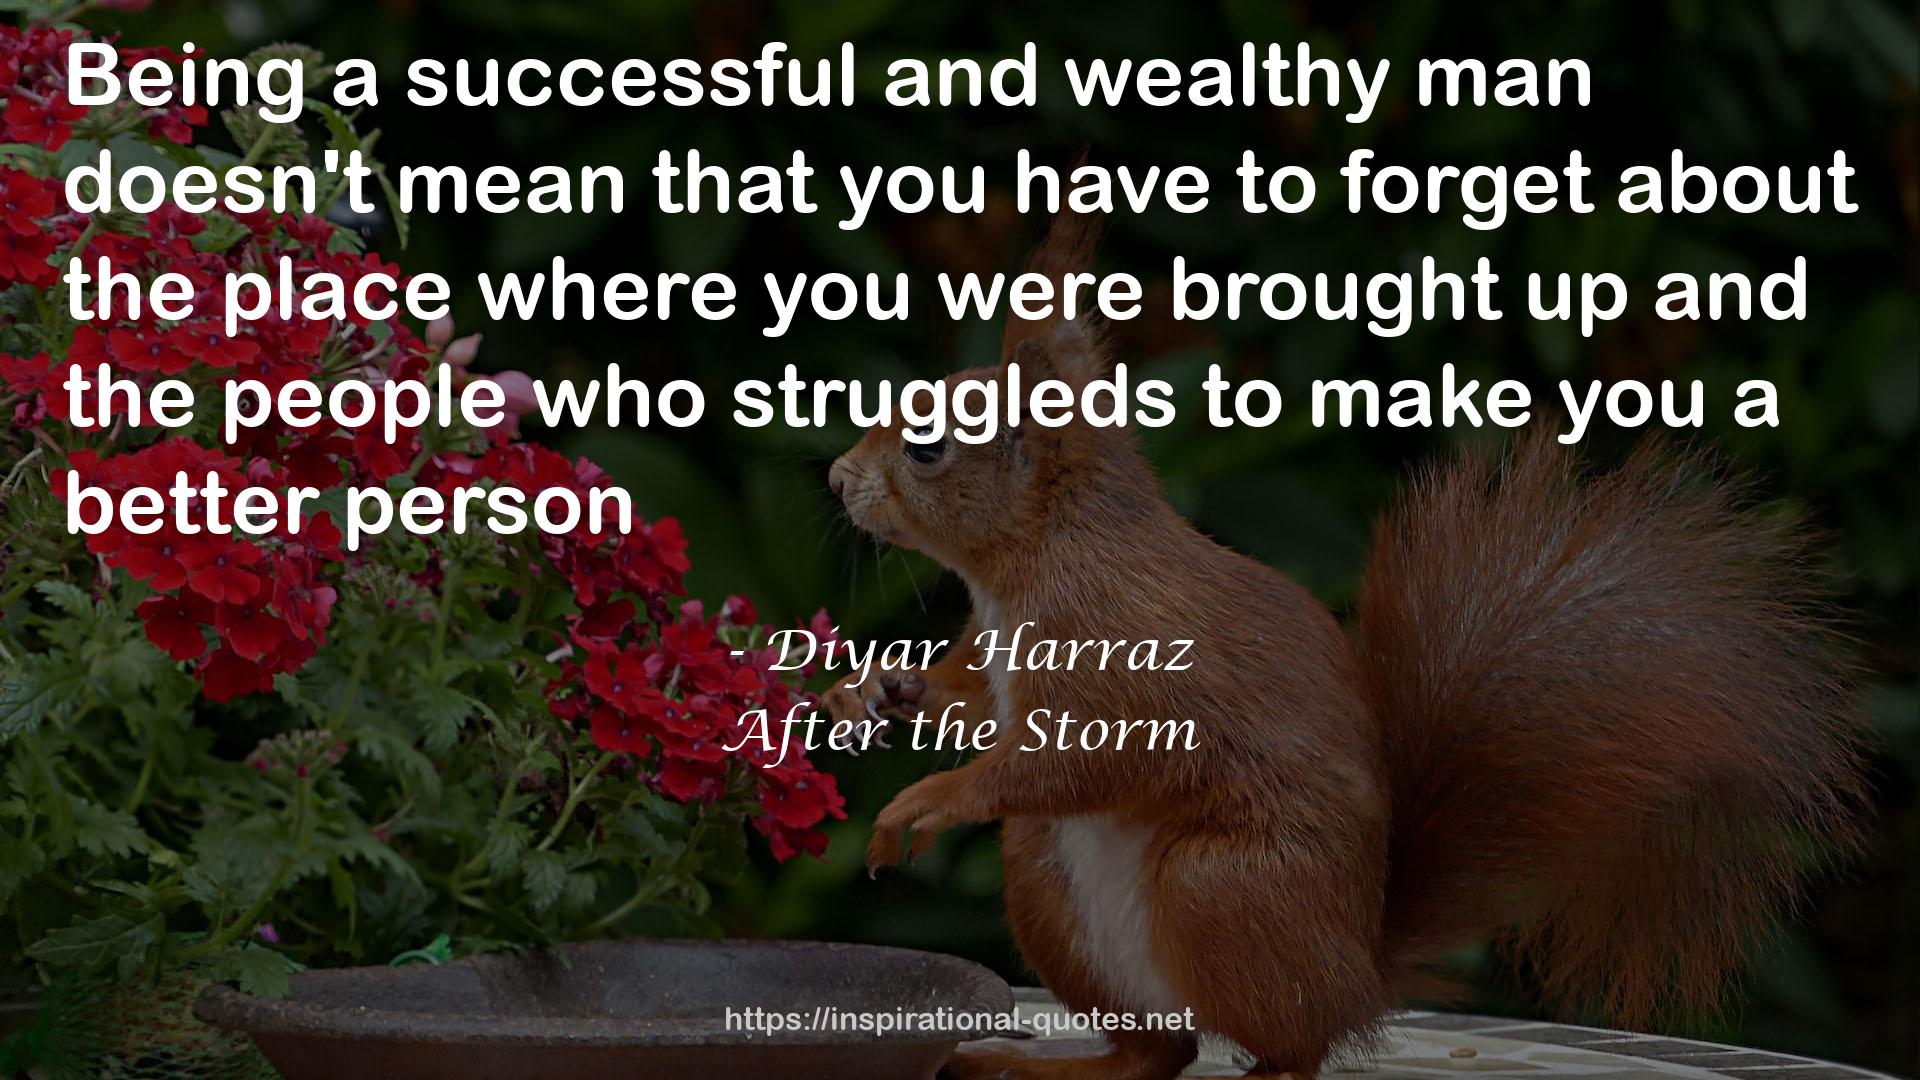 a successful and wealthy man  QUOTES